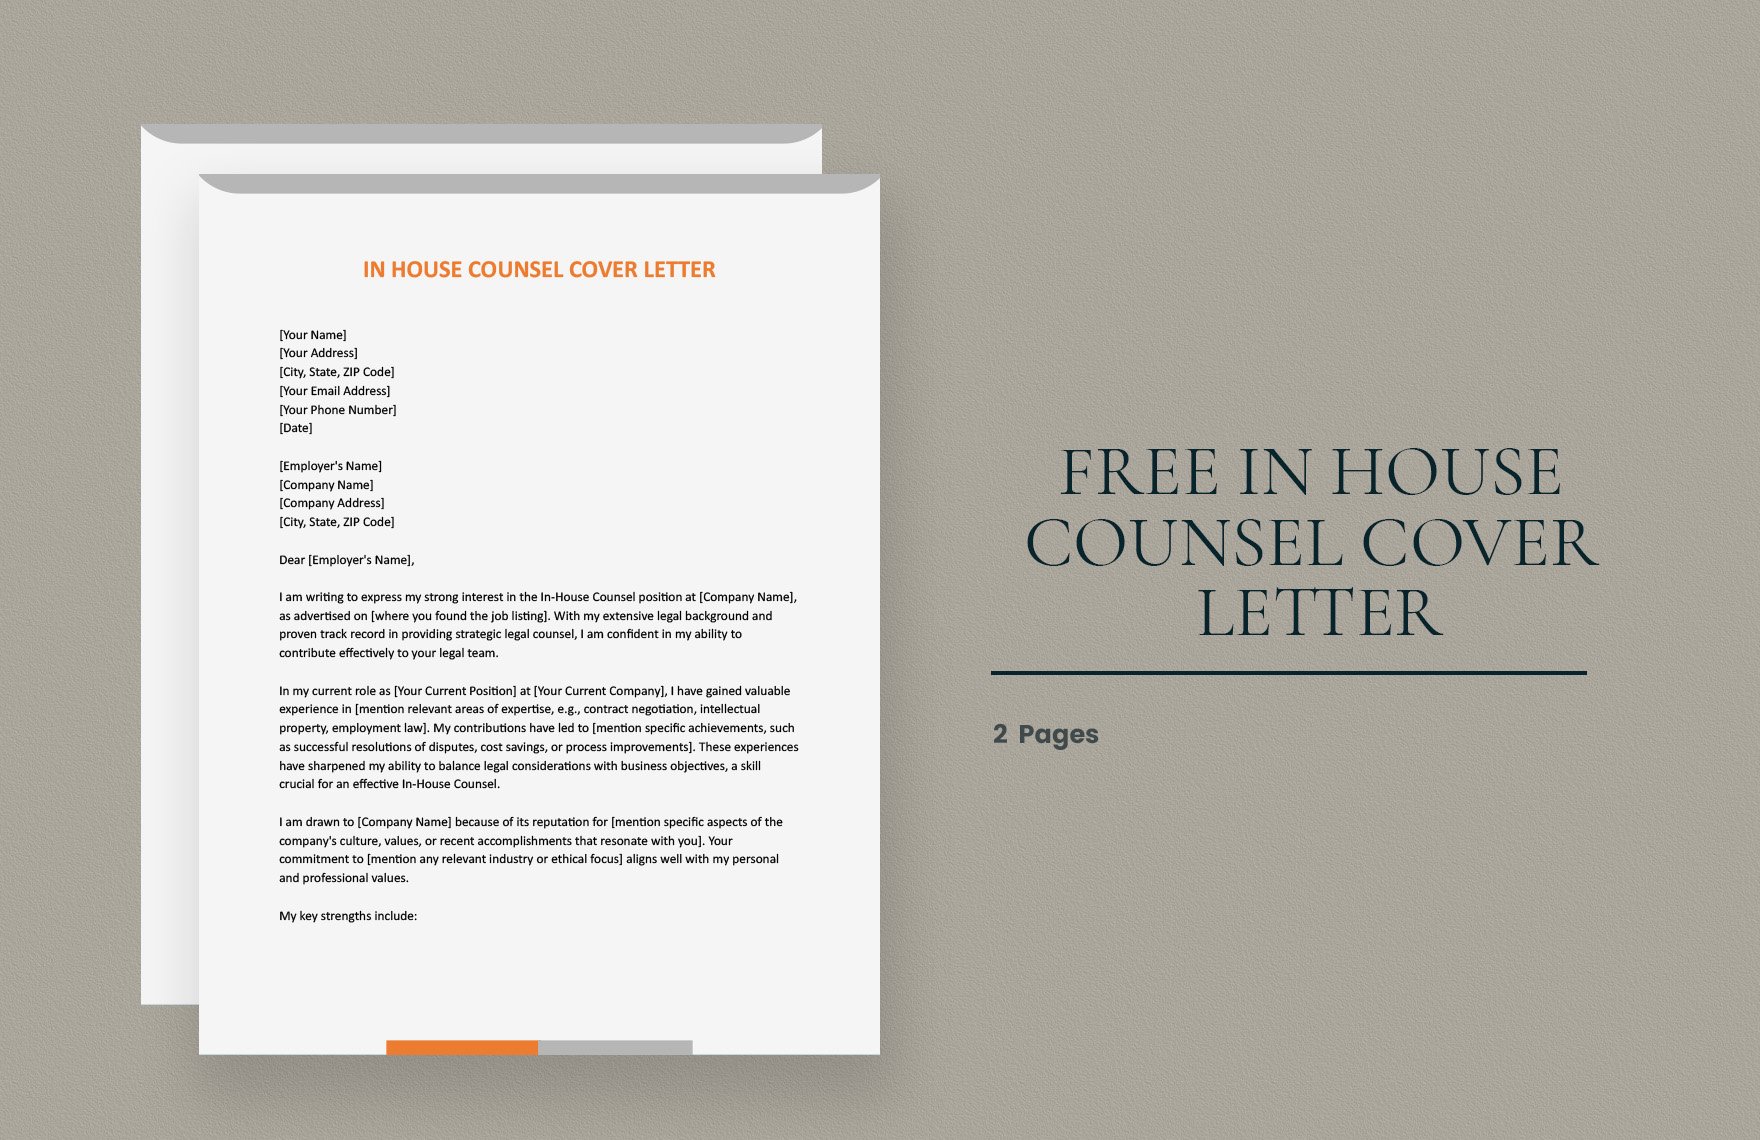 In House Counsel Cover Letter